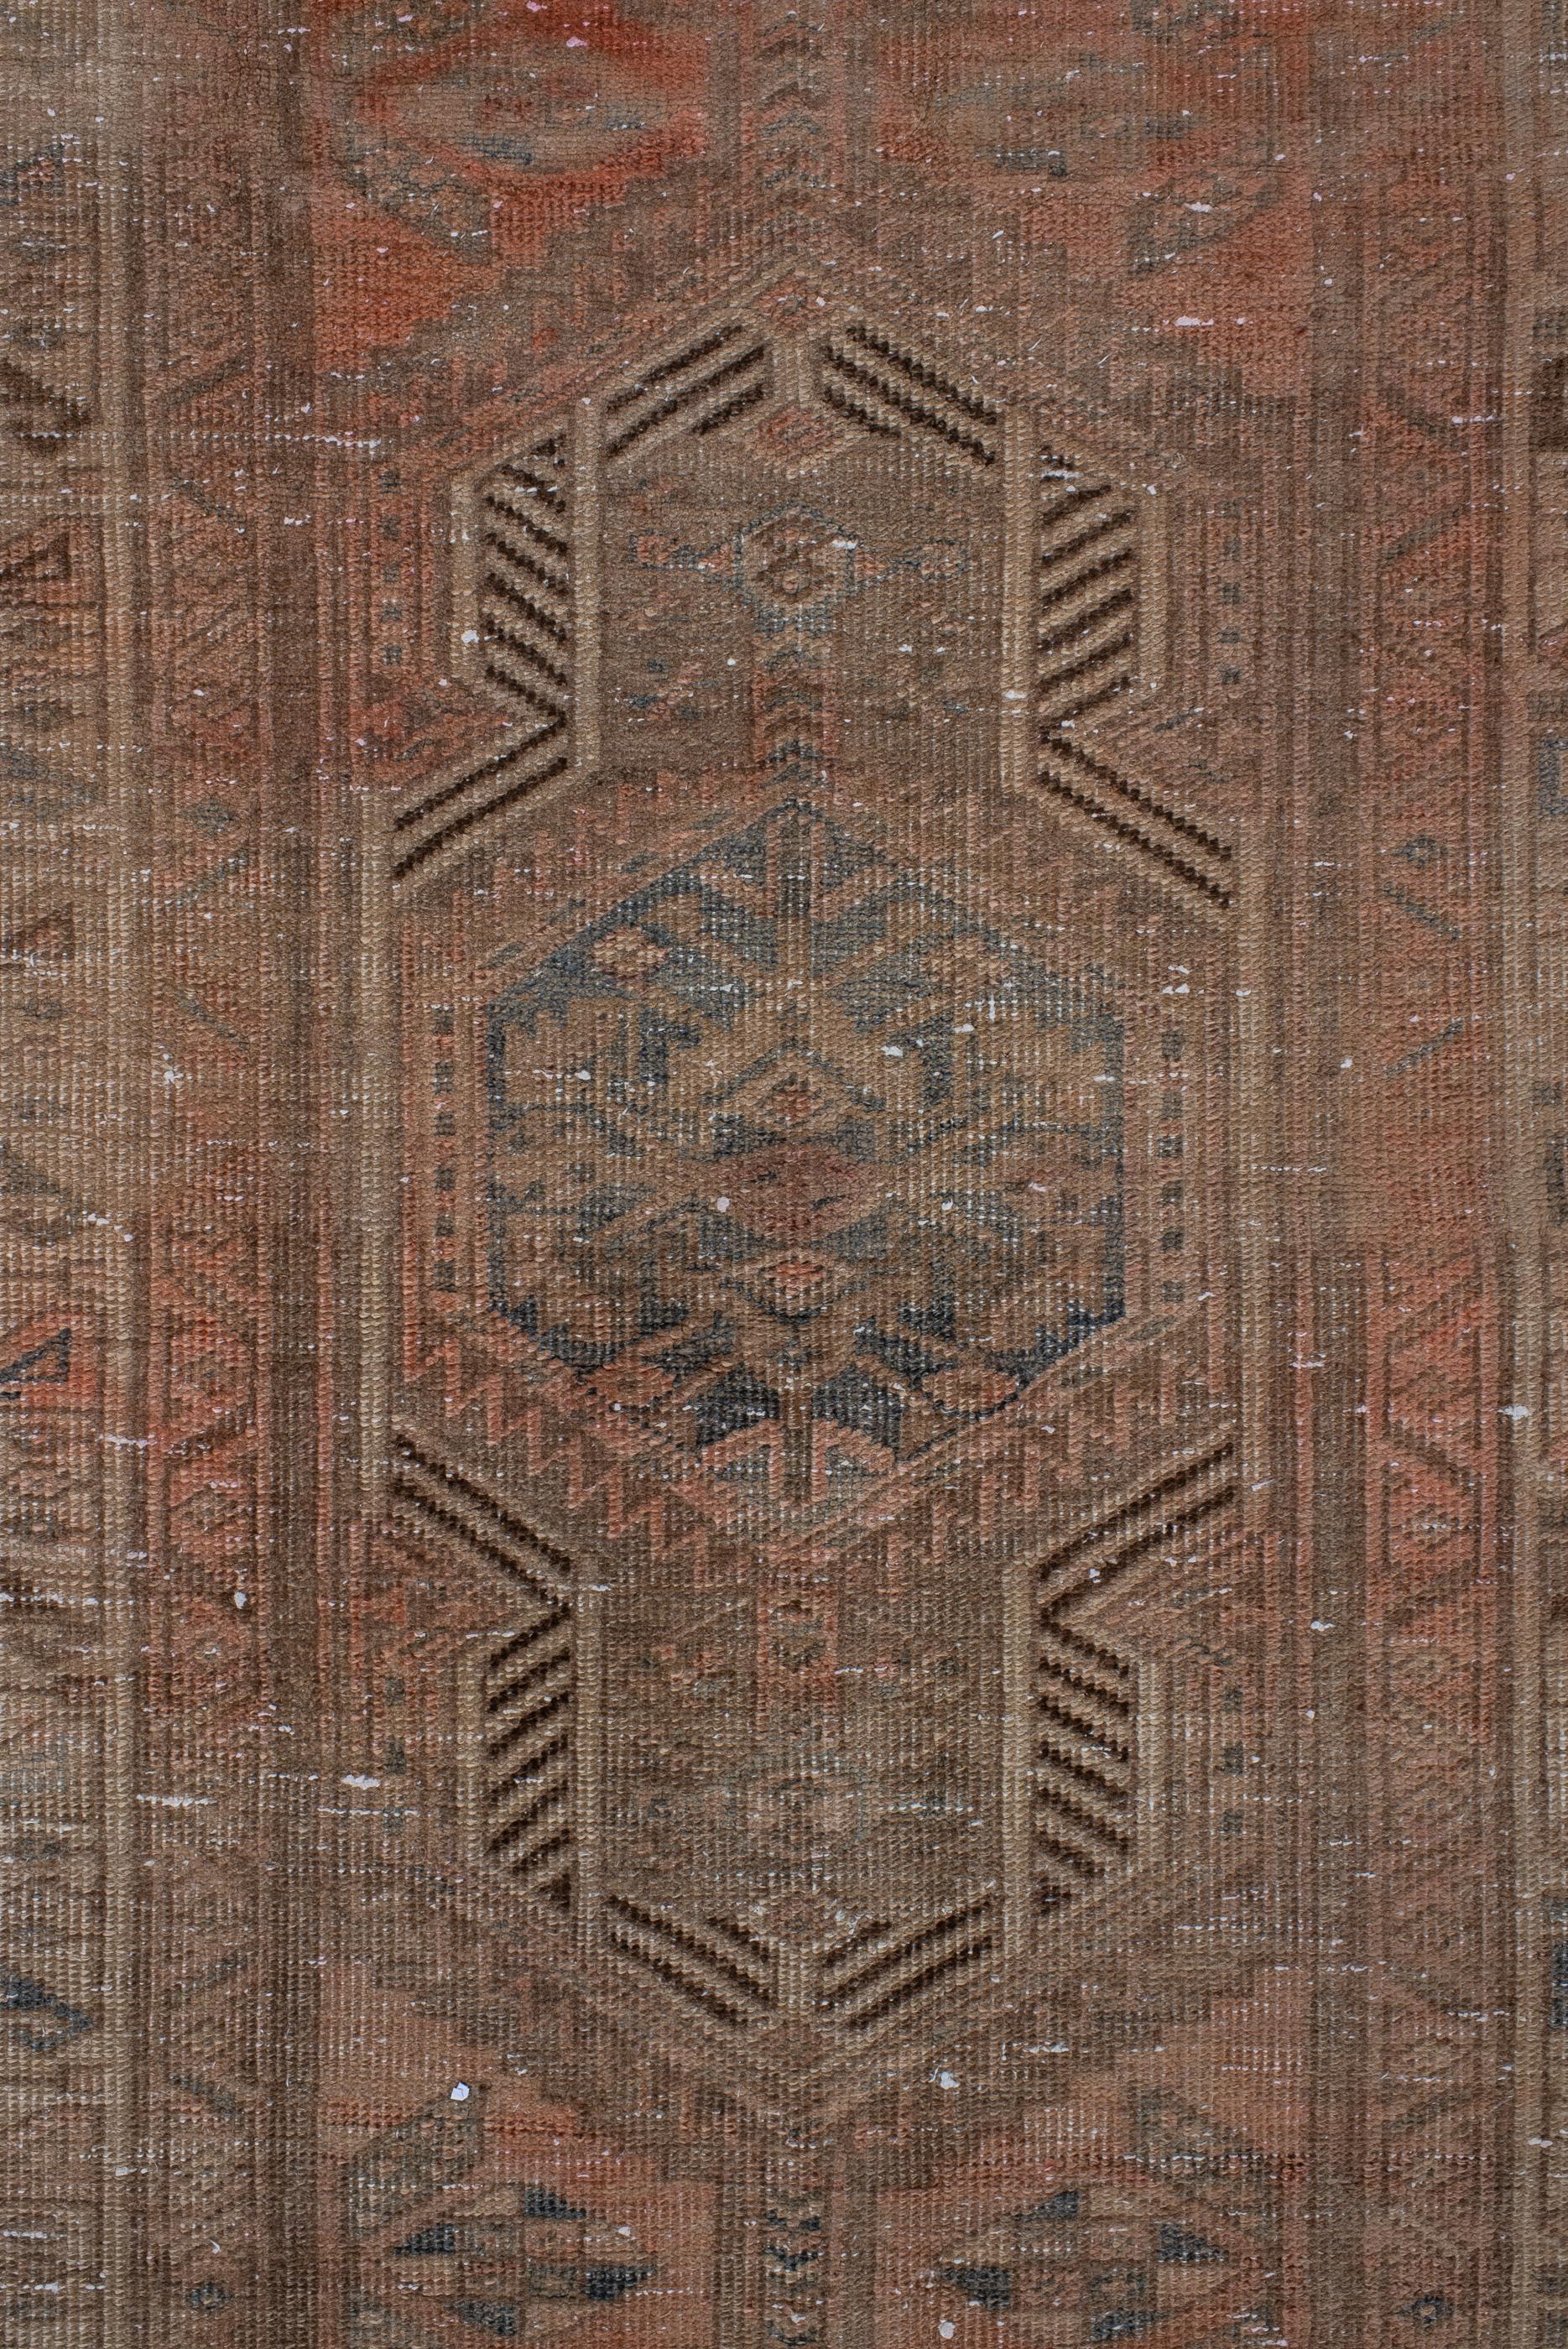 Hand-Knotted Camel Tone Antique Sarab, Early 20th Century For Sale